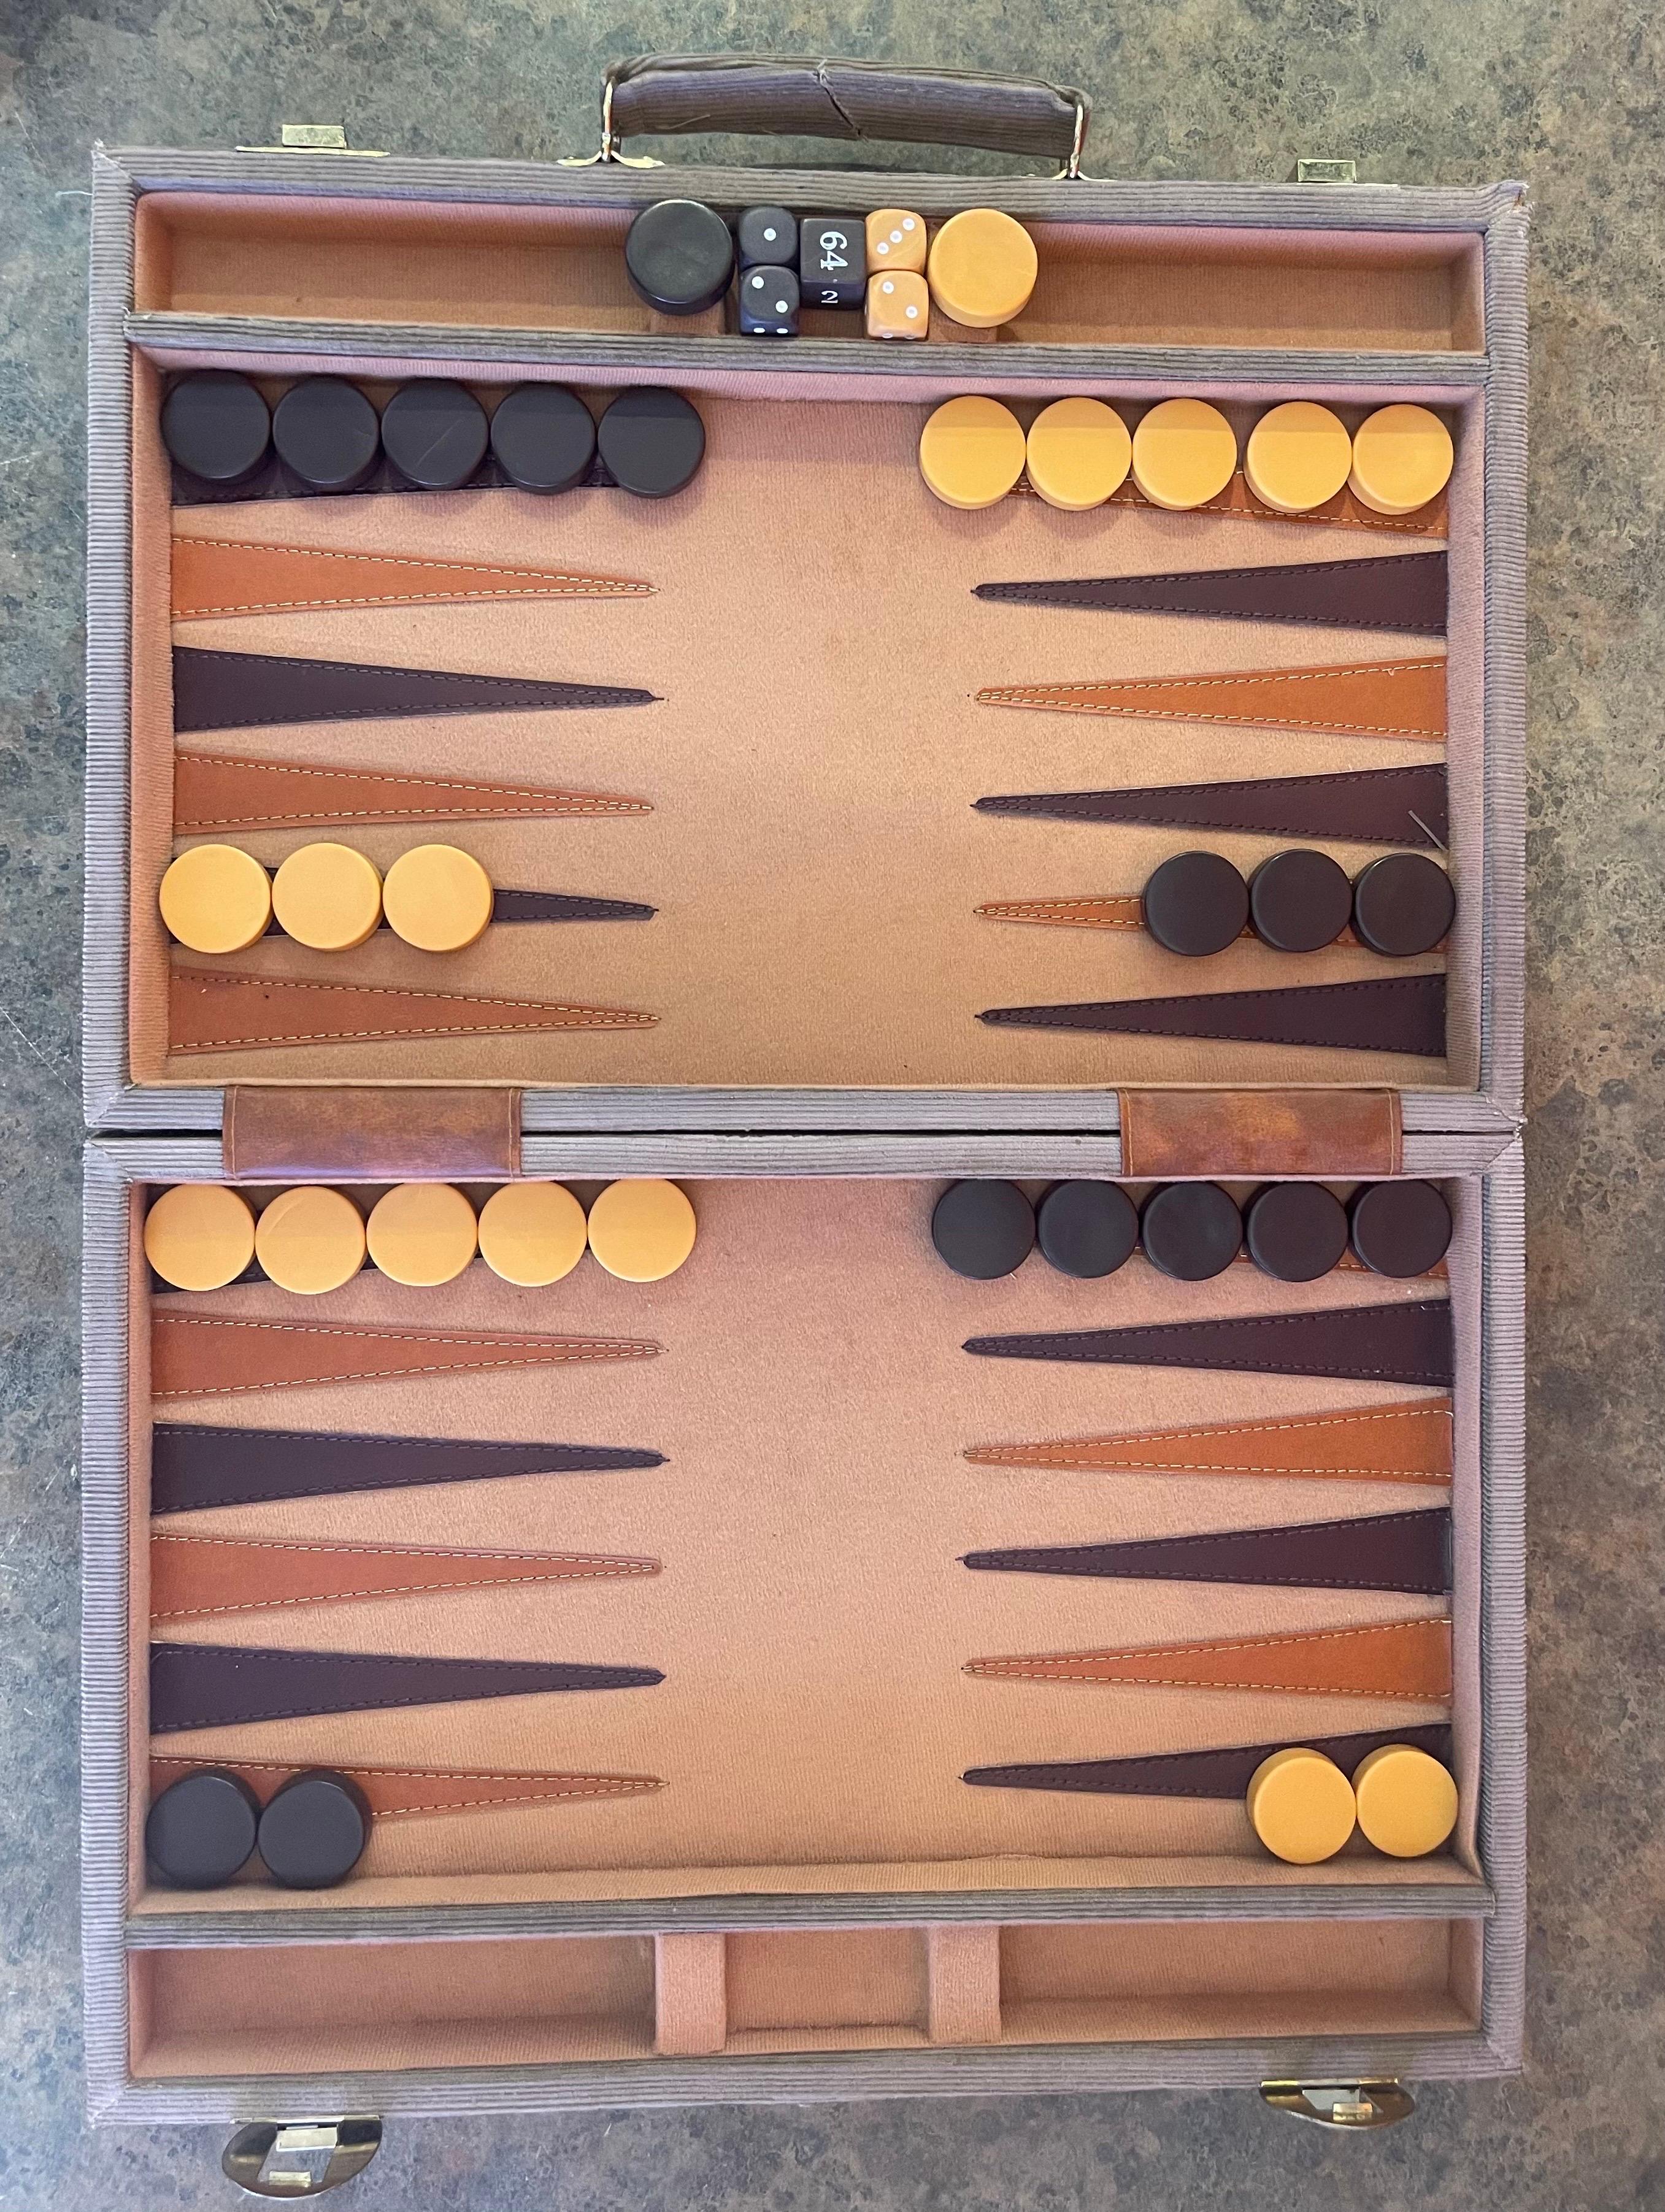 how to set up a backgammon board